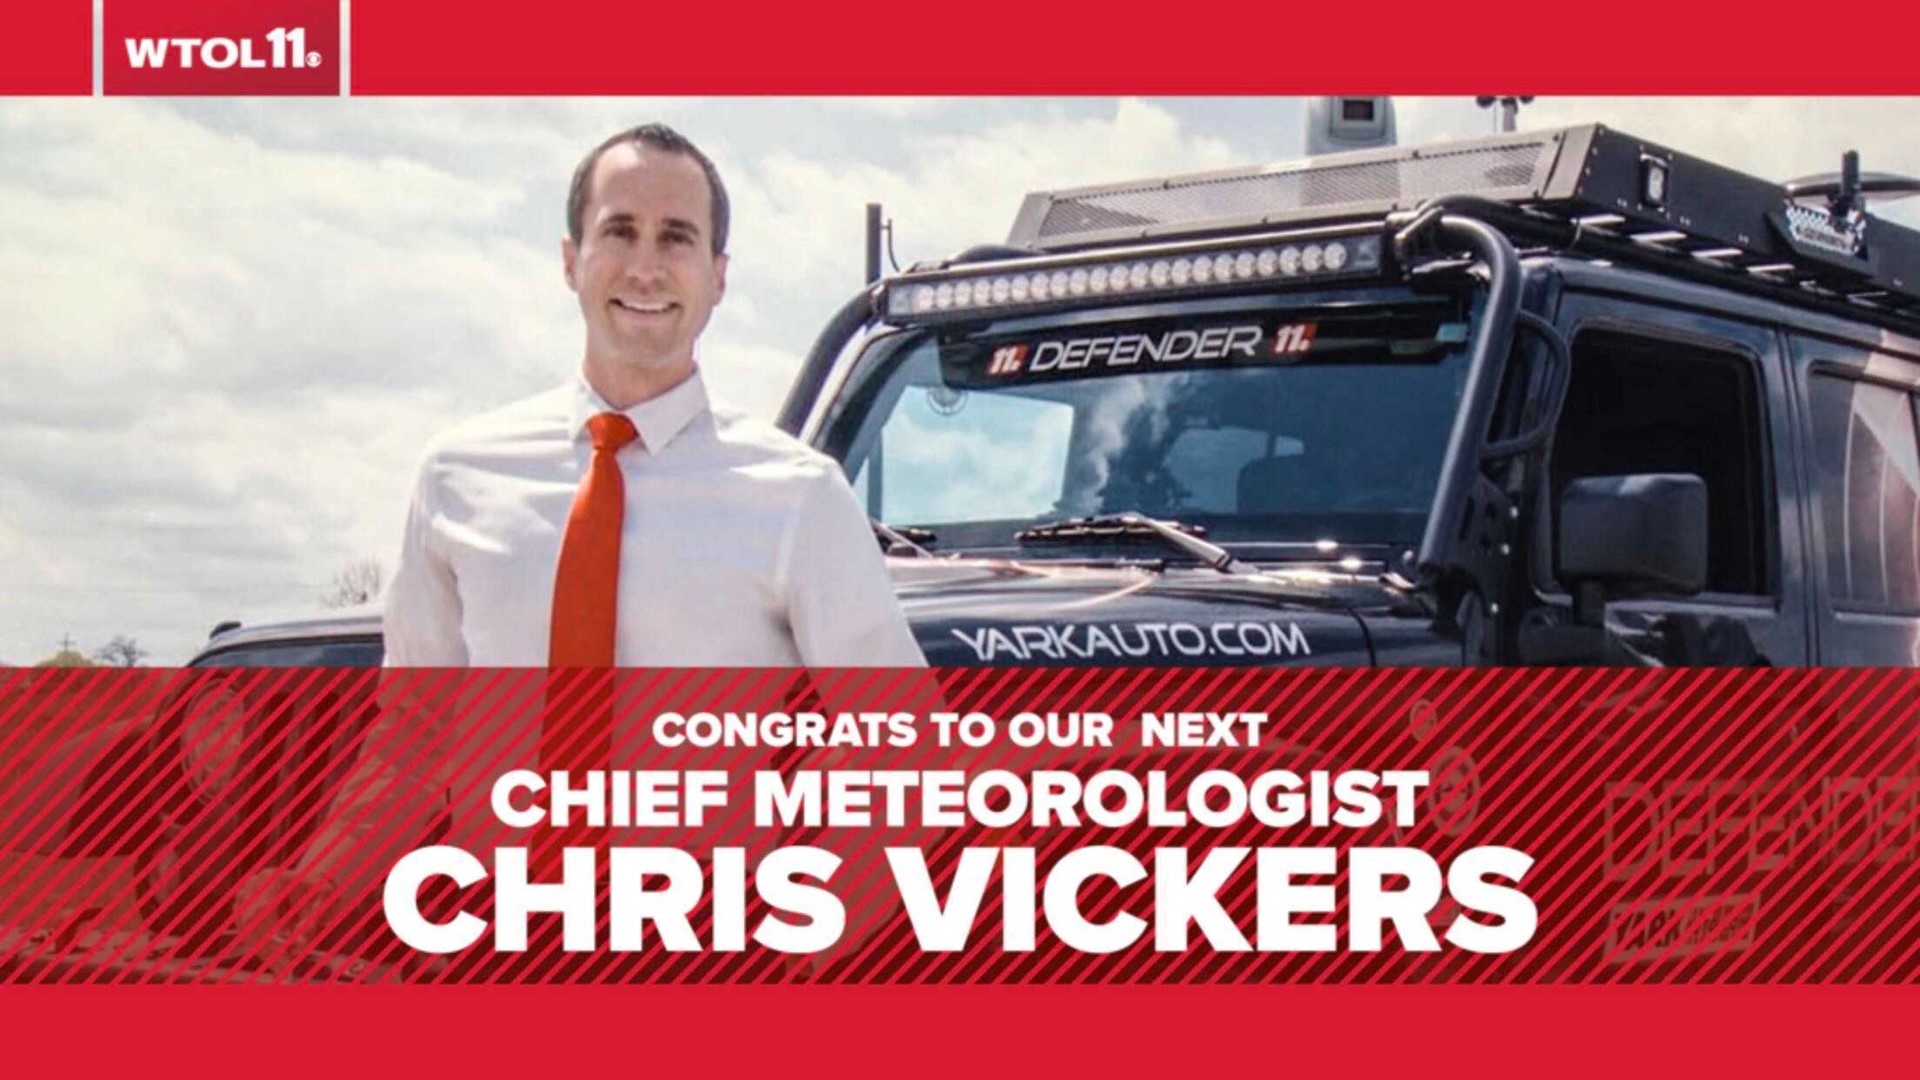 Robert Shiels leaves in July for a career in real estate. WTOL 11’s next leader of the First Alert weather team is Chief Meteorologist Chris Vickers.